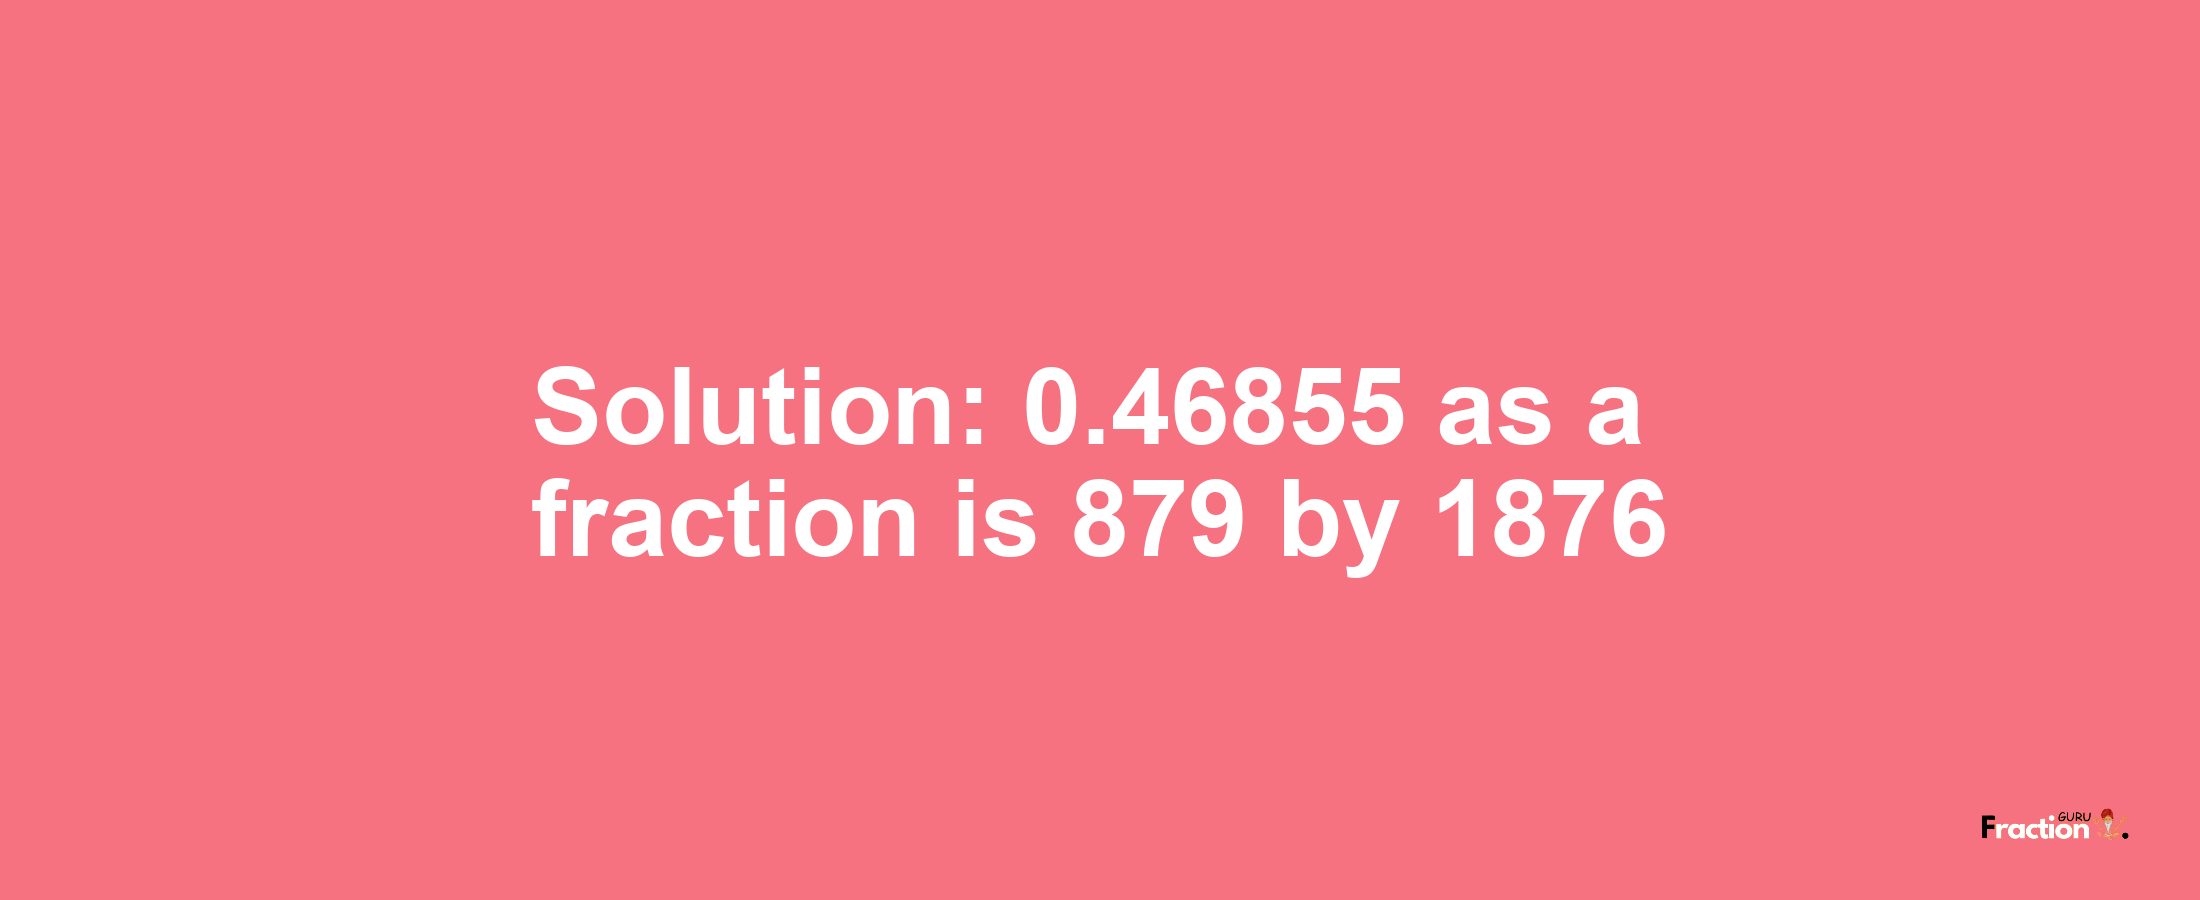 Solution:0.46855 as a fraction is 879/1876